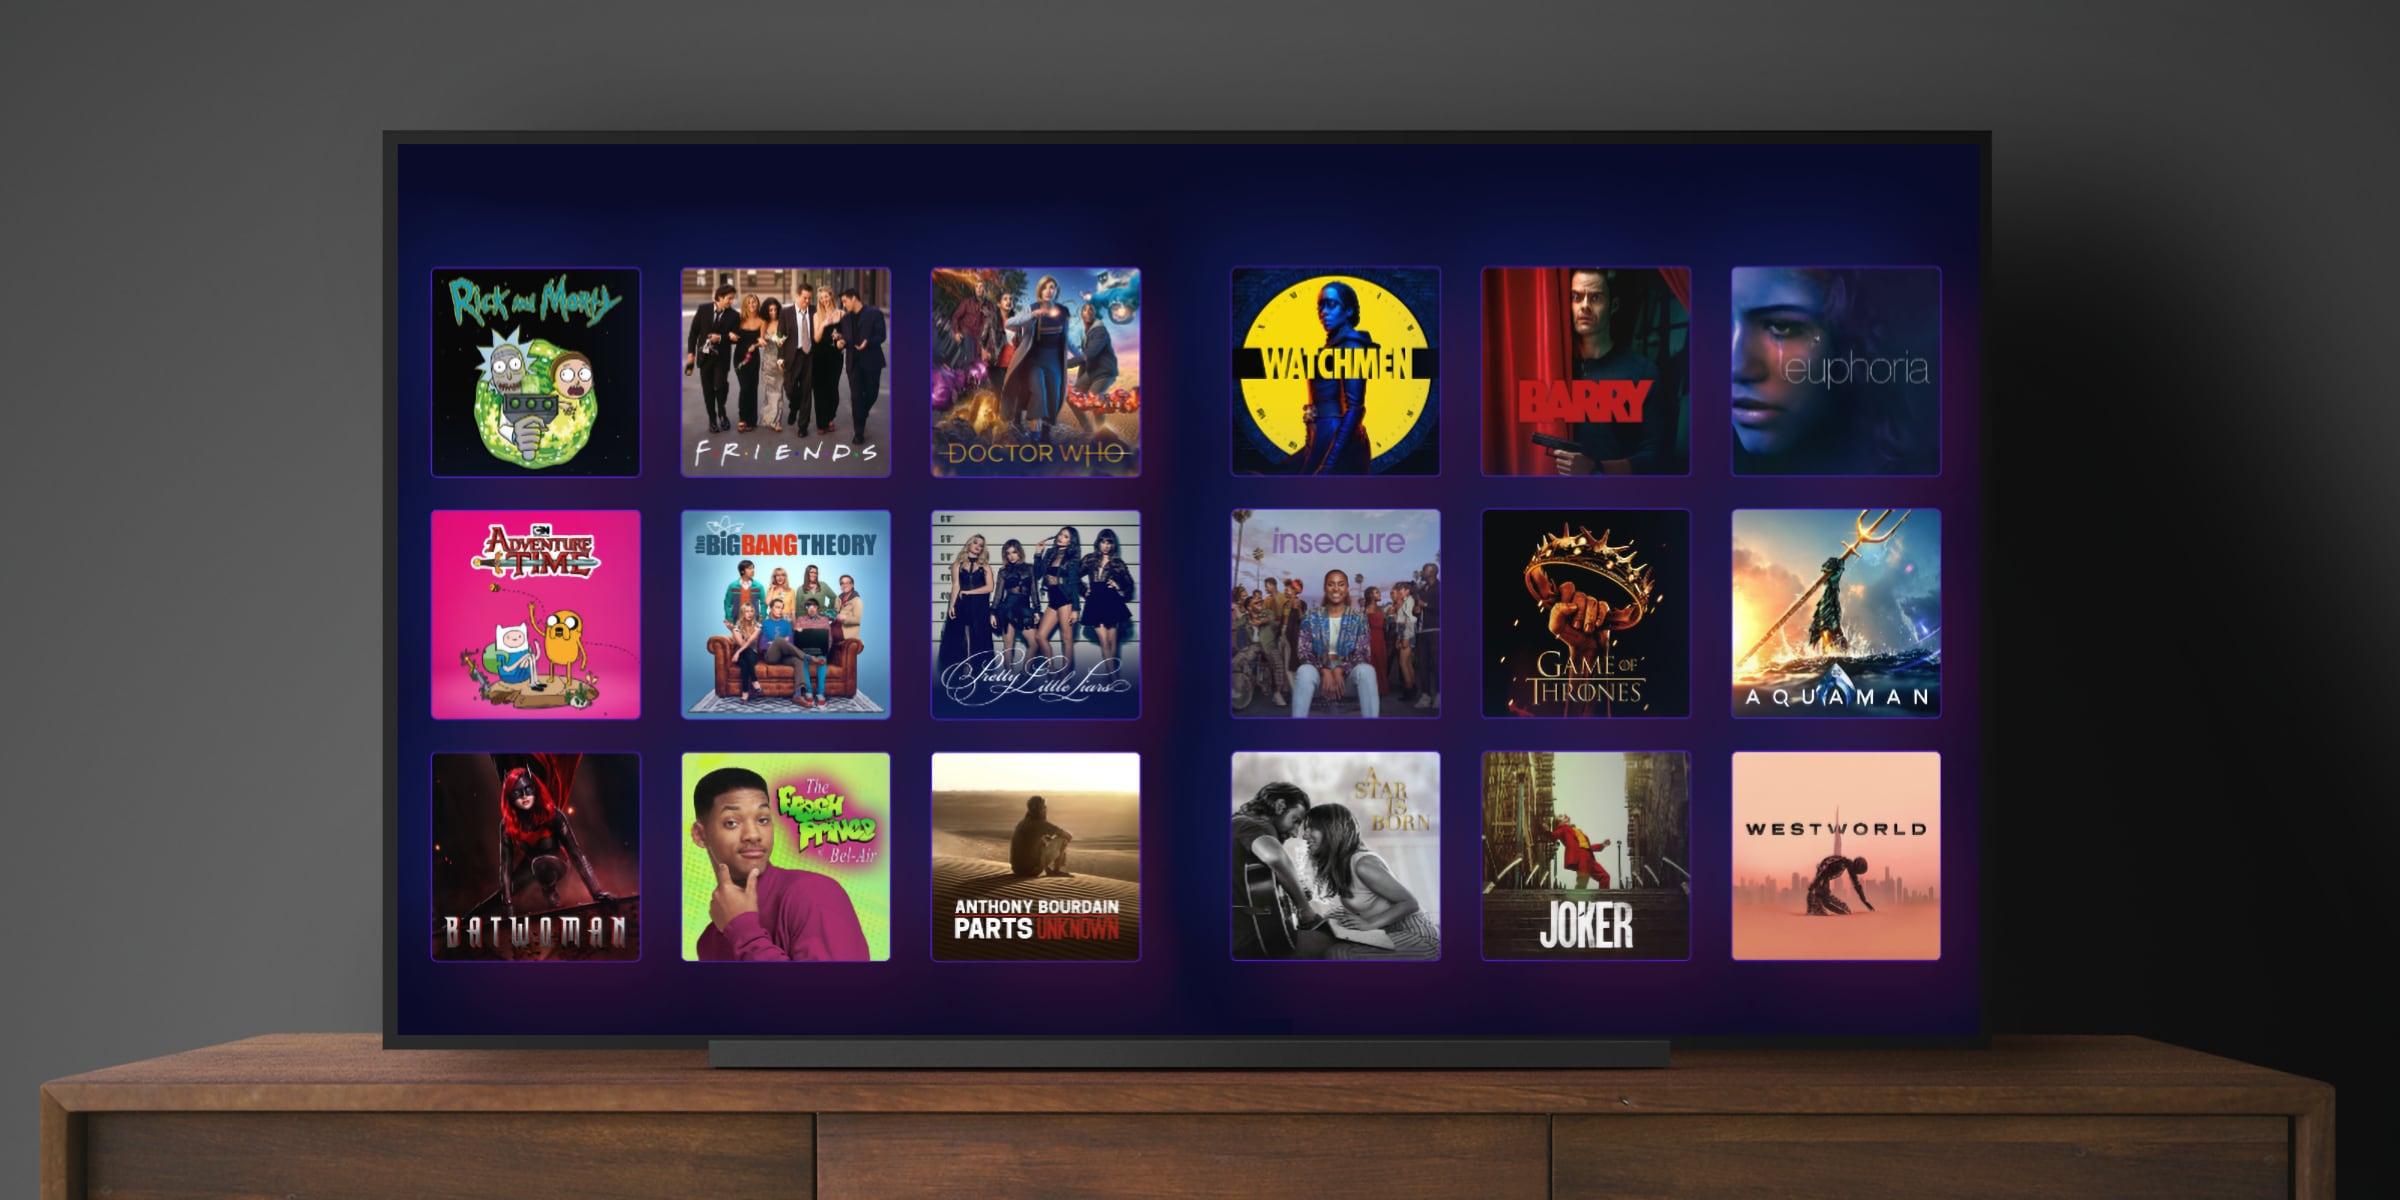 HBO MAX APP LAUNCHES ON LG SMART TVS IN US